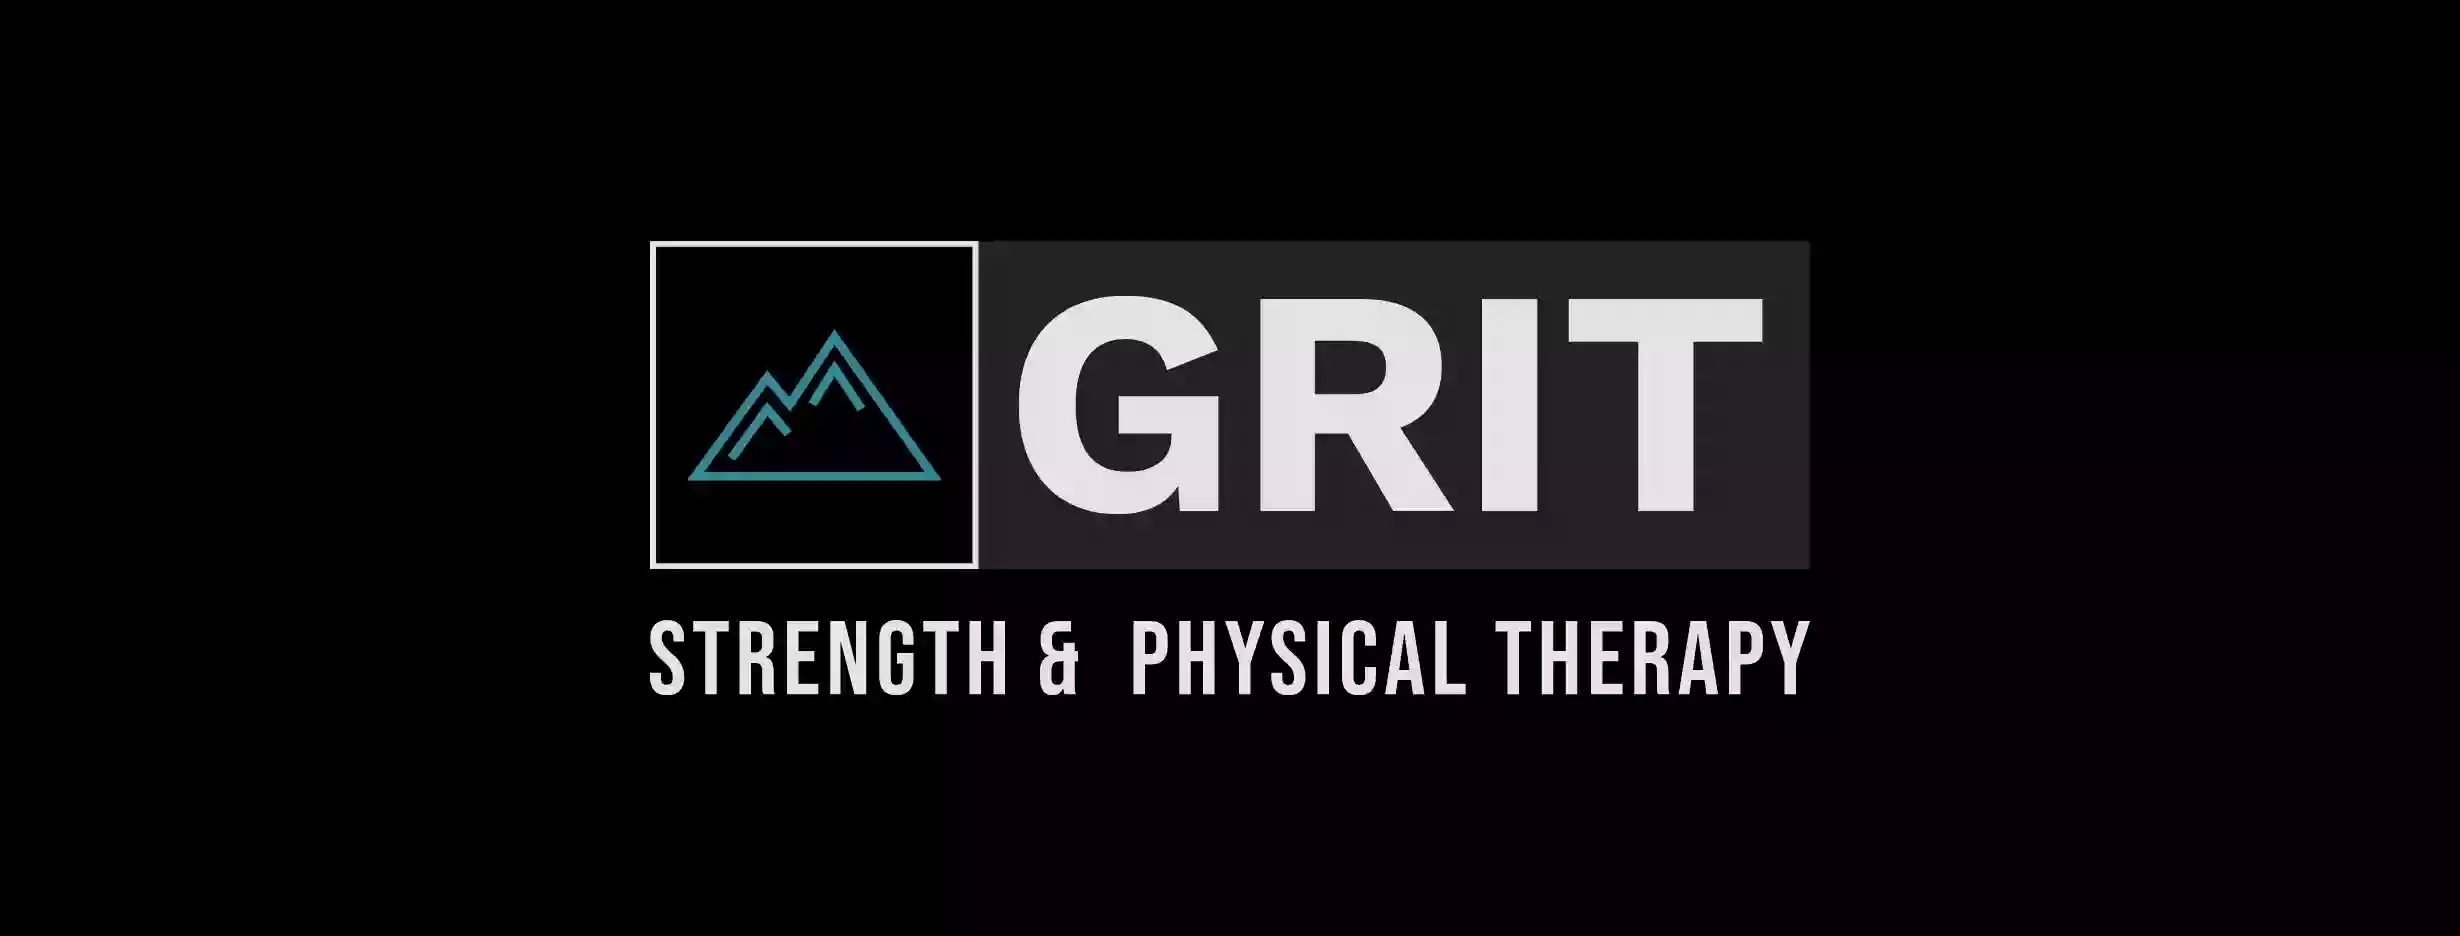 Grit Strength & Physical Therapy